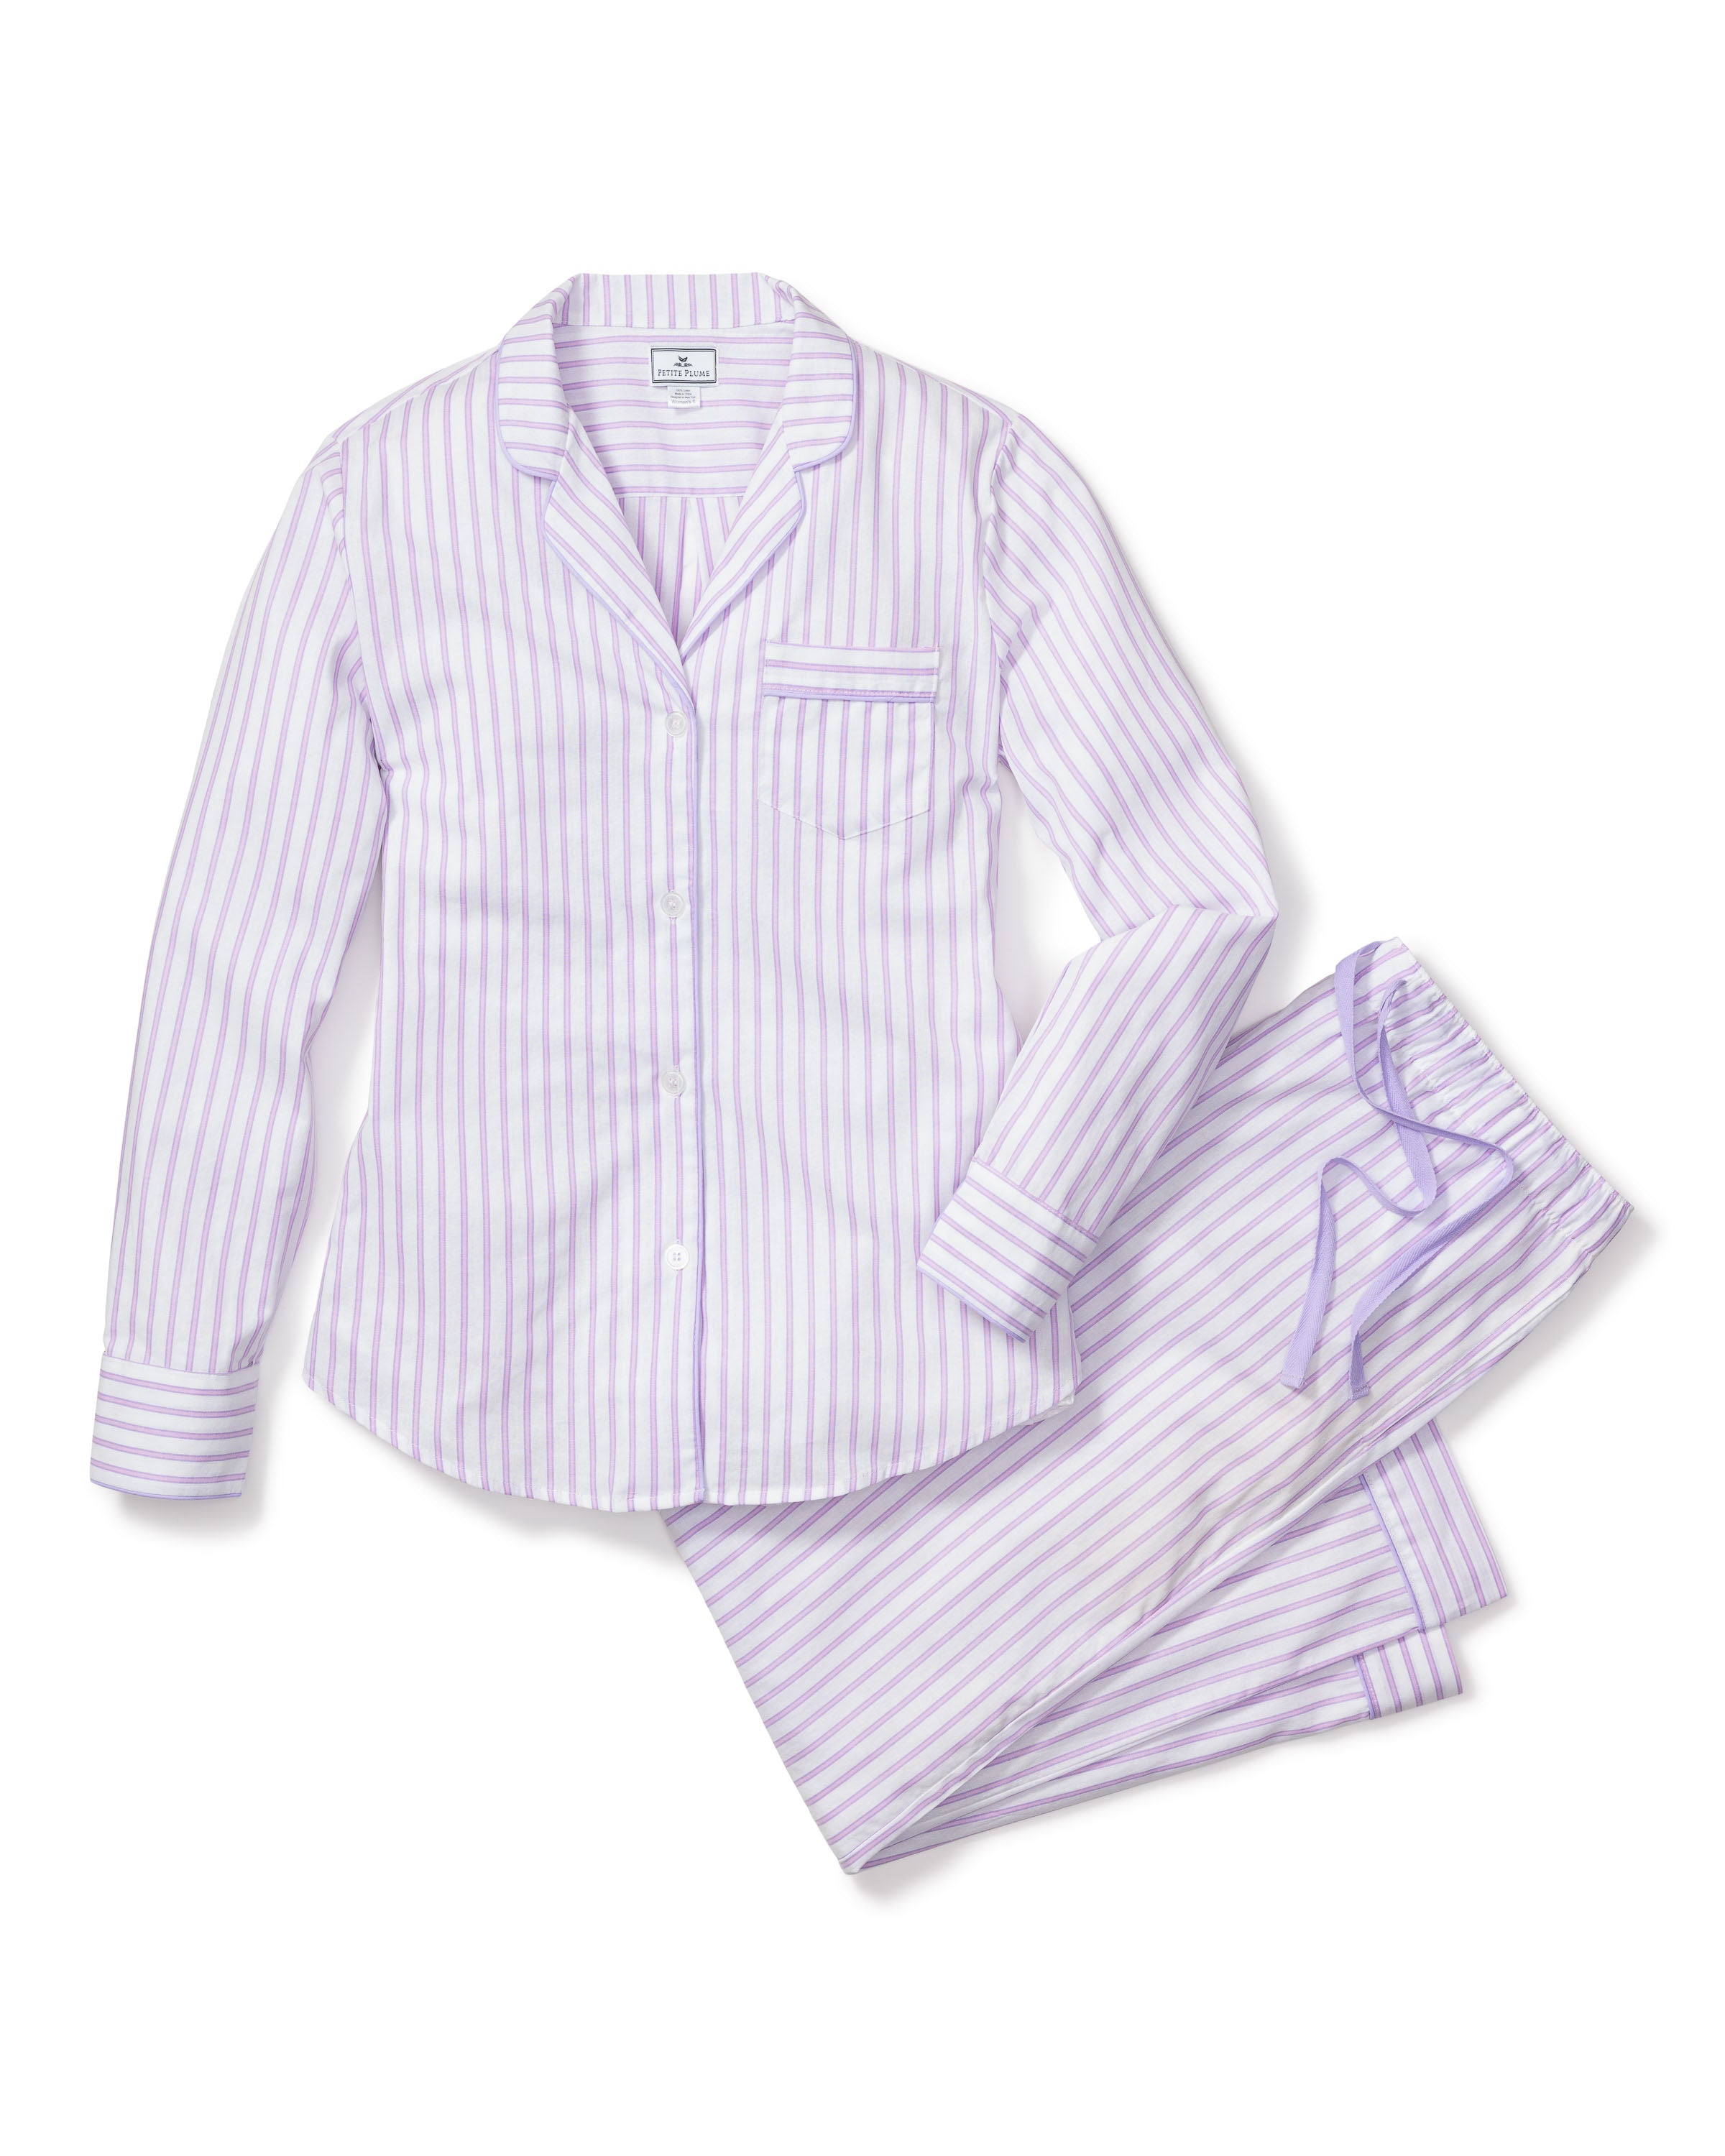 Women's Twill Pajama Set in Lavender French Ticking